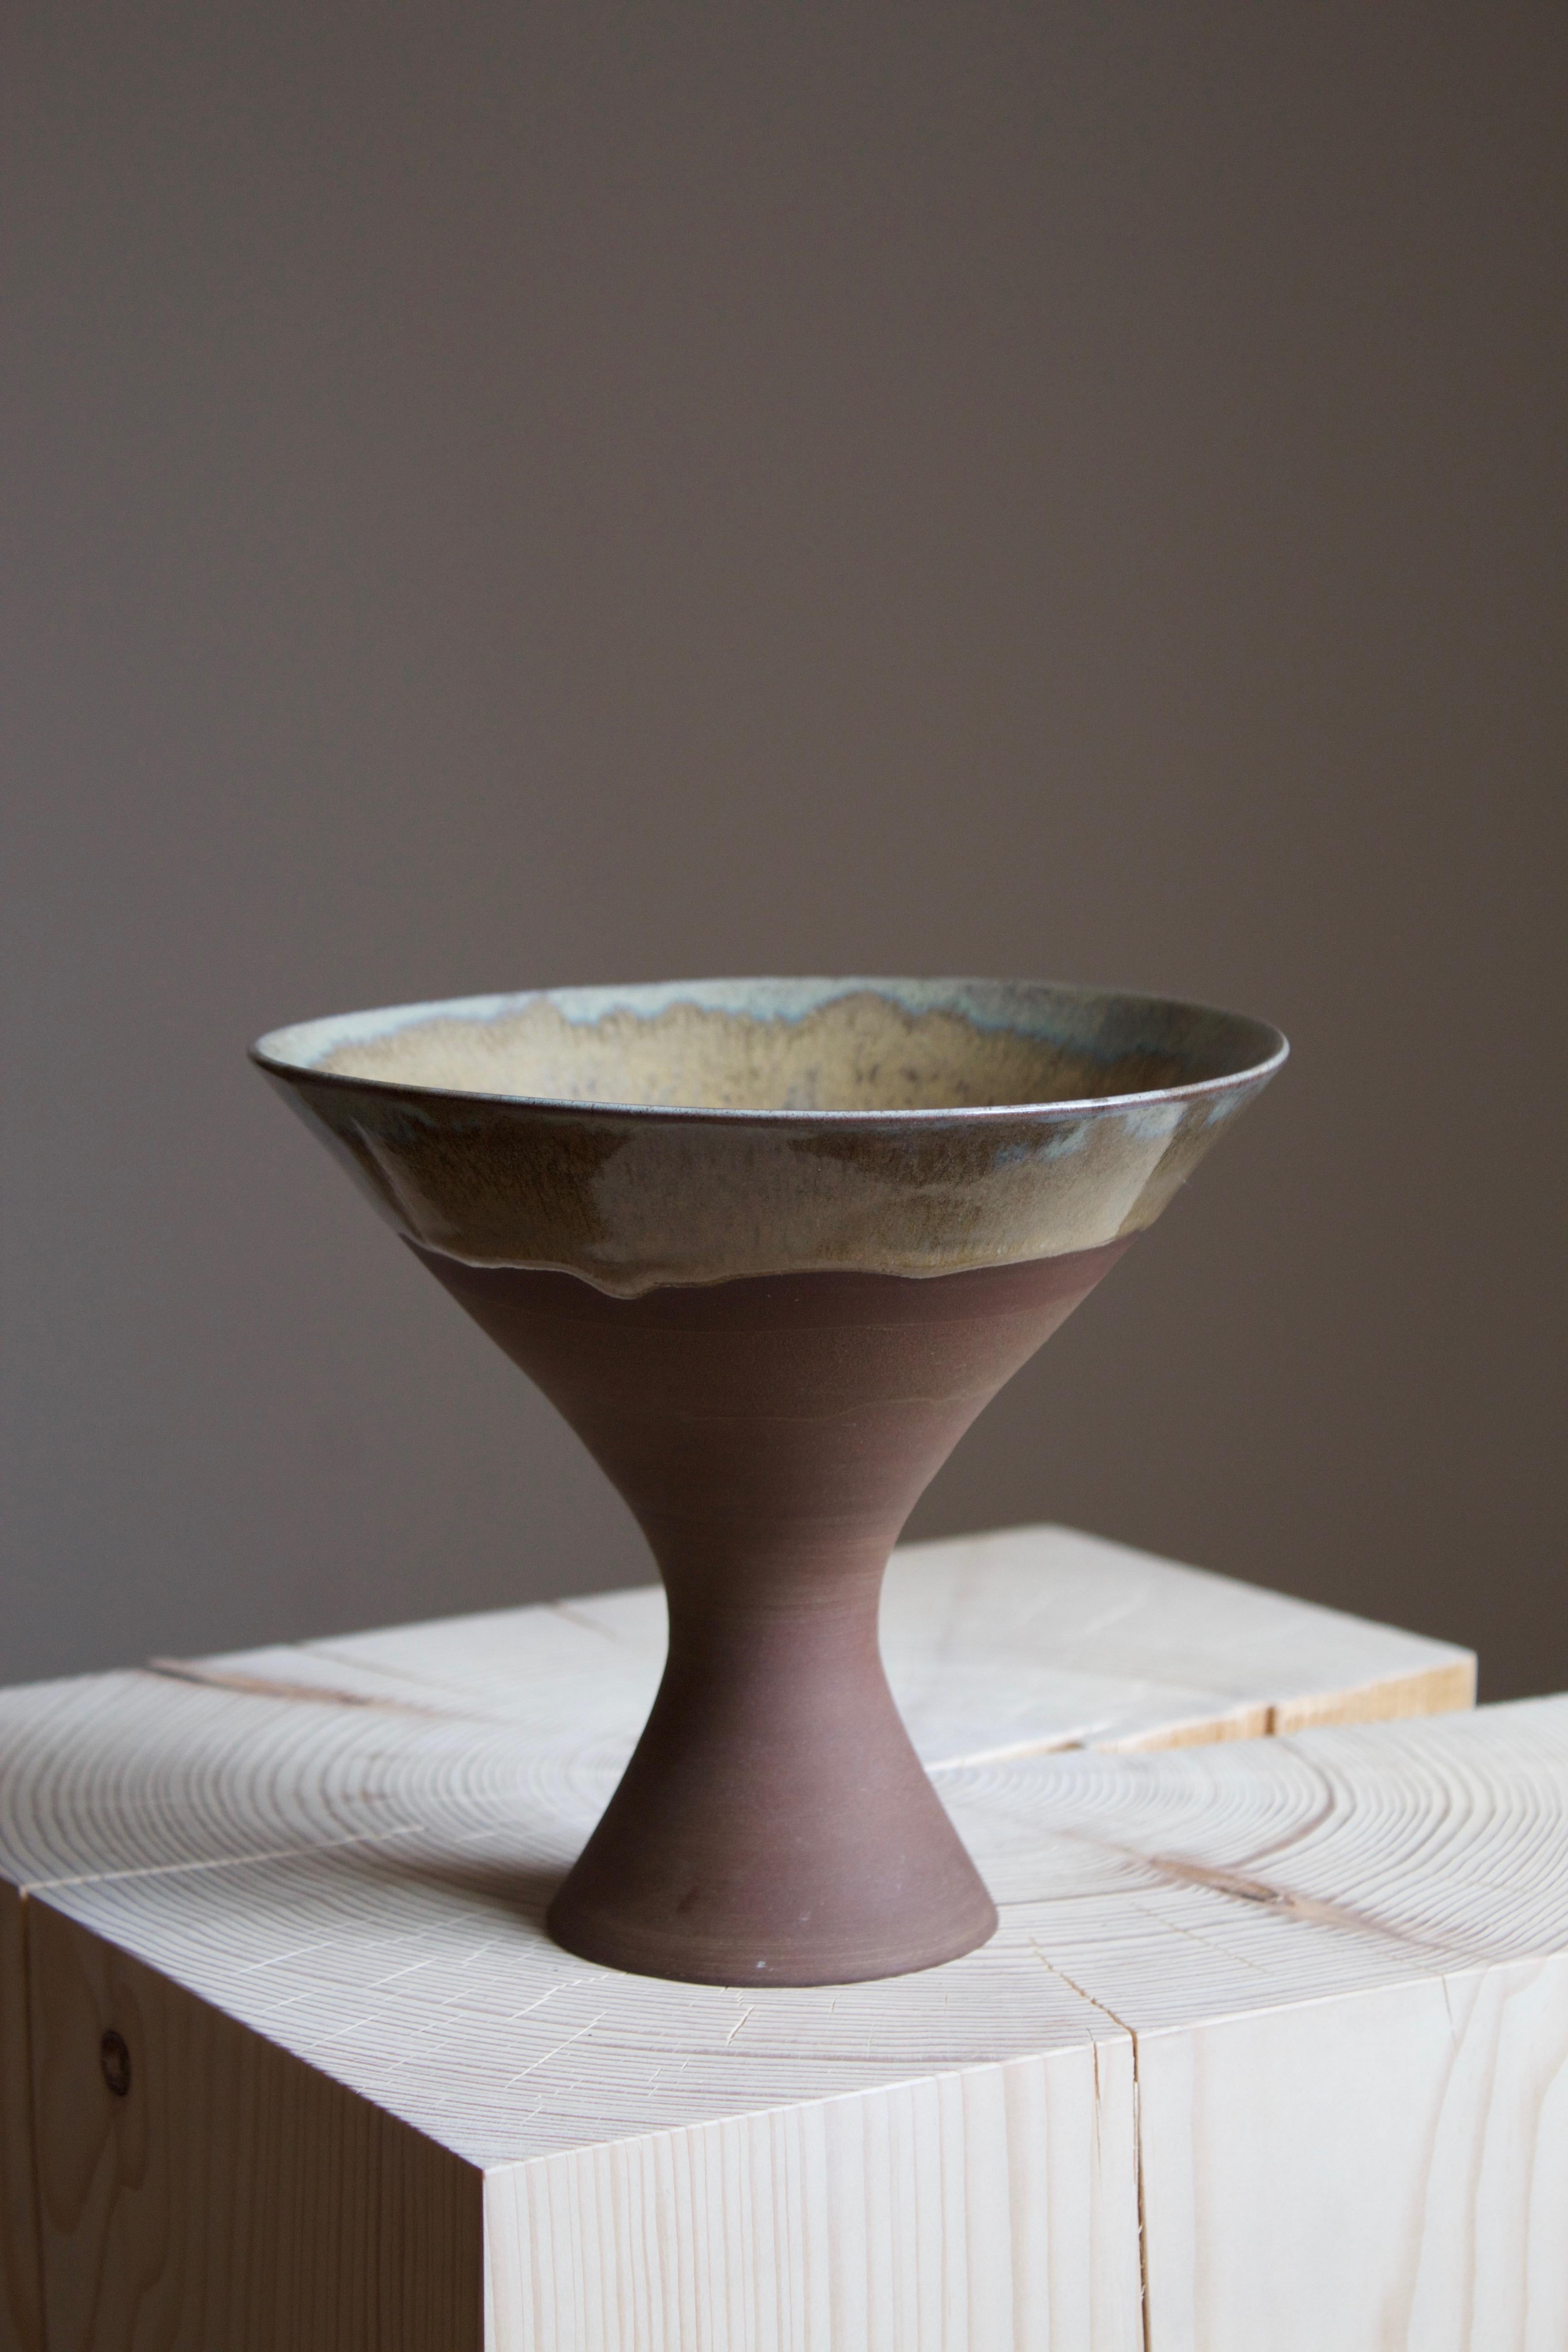 A vase or bowl, produced by Sven Hofverberg in his own studio, Landskrona, Sweden, 1970s. Signed. 

Other designers of the period include Lucie Rie, Carl Harry Stålhane, Hans Cooper, and Saxbo.